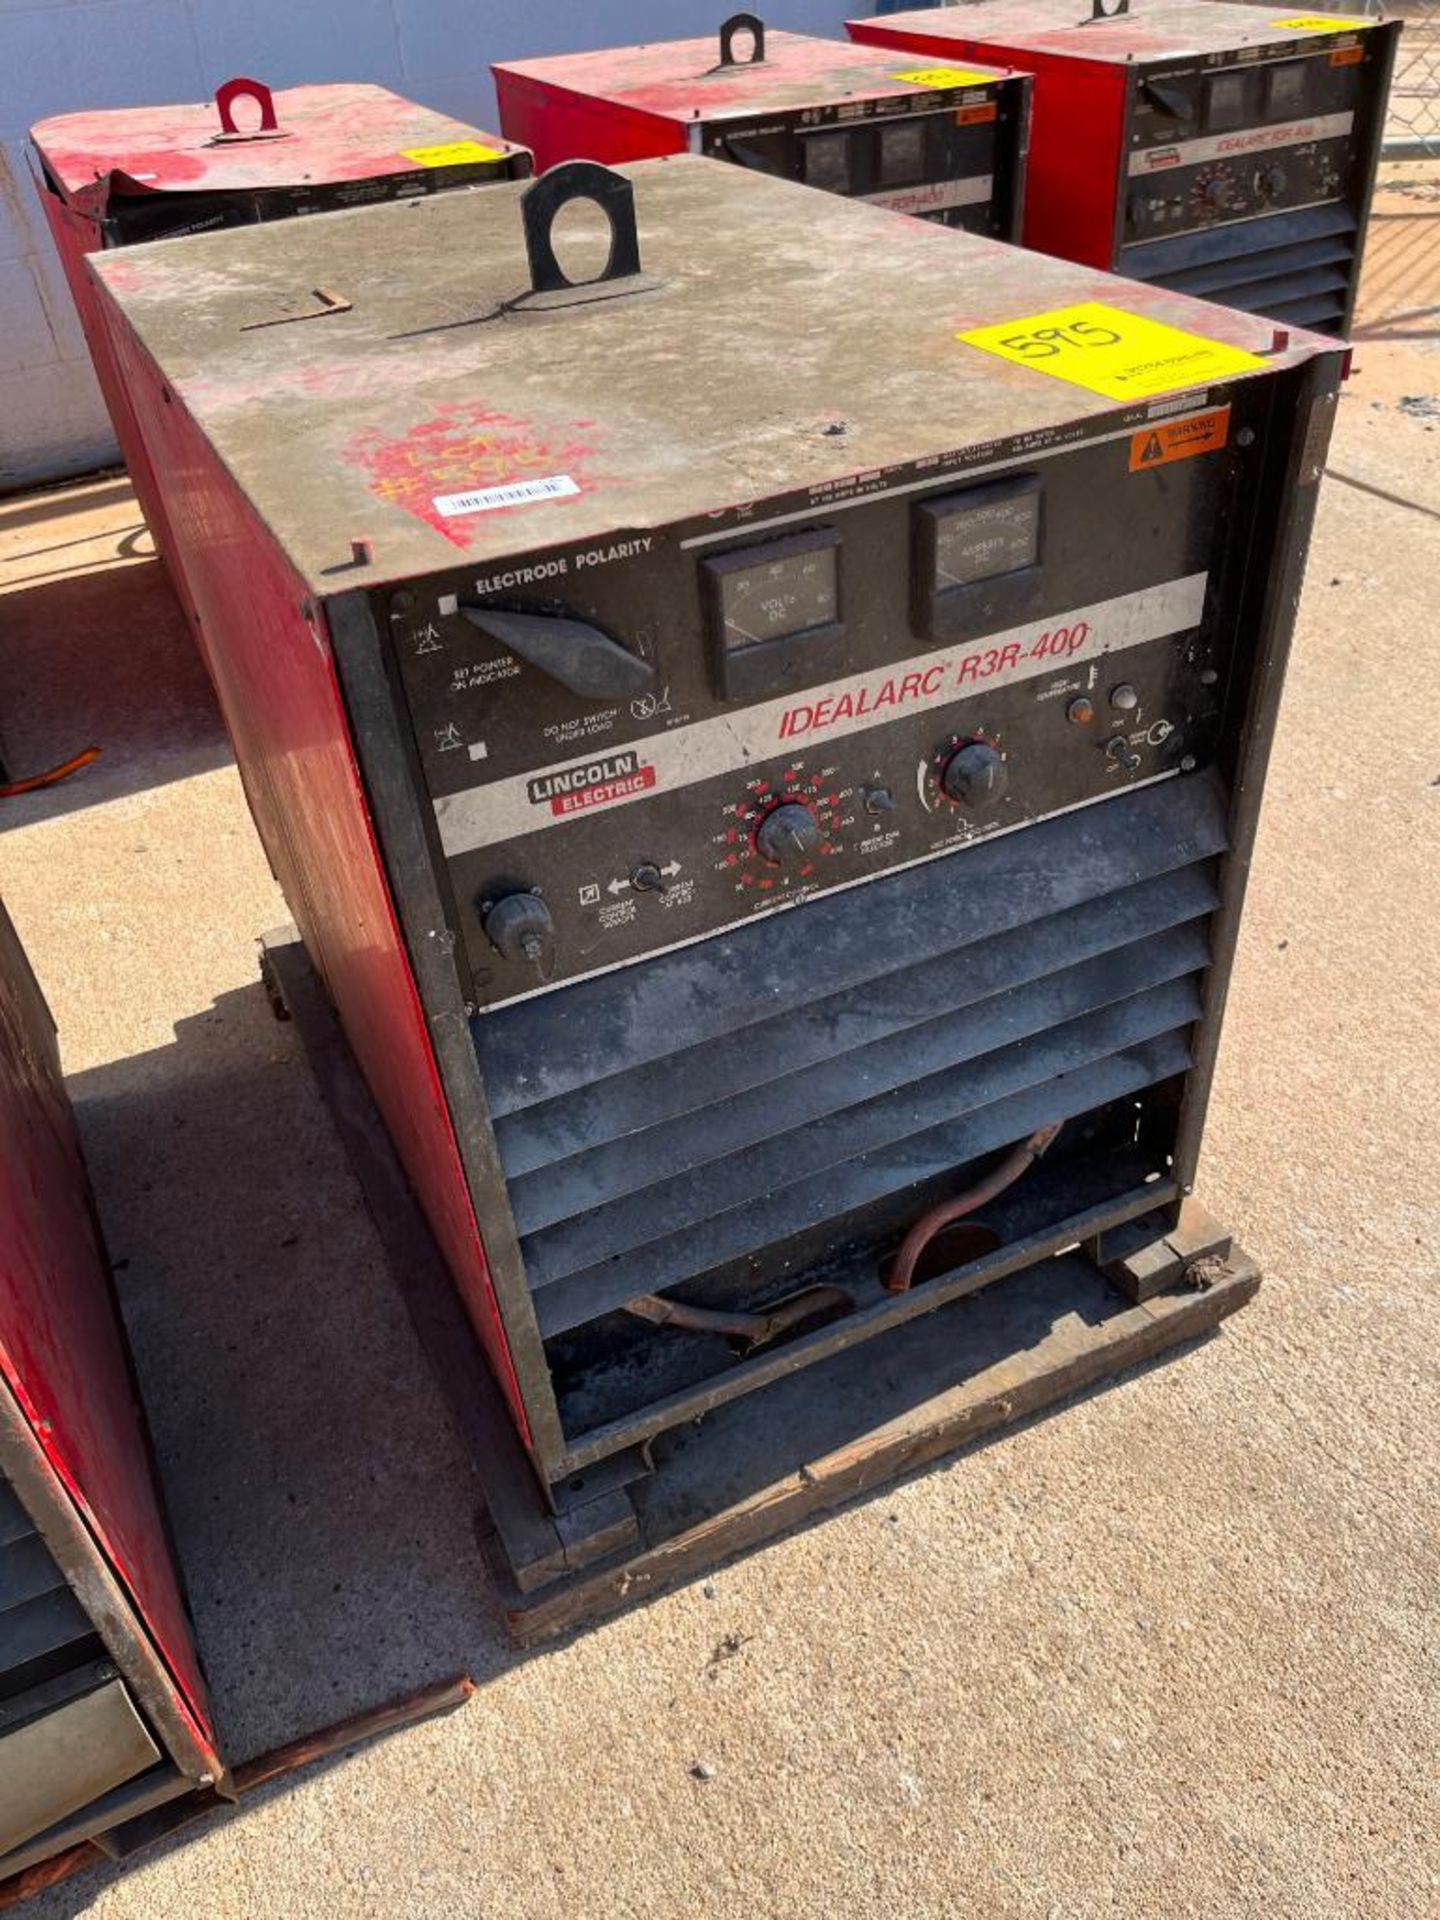 Lincoln Idealarc R3R-400 Variable Voltage DC ARC Welding Power Source